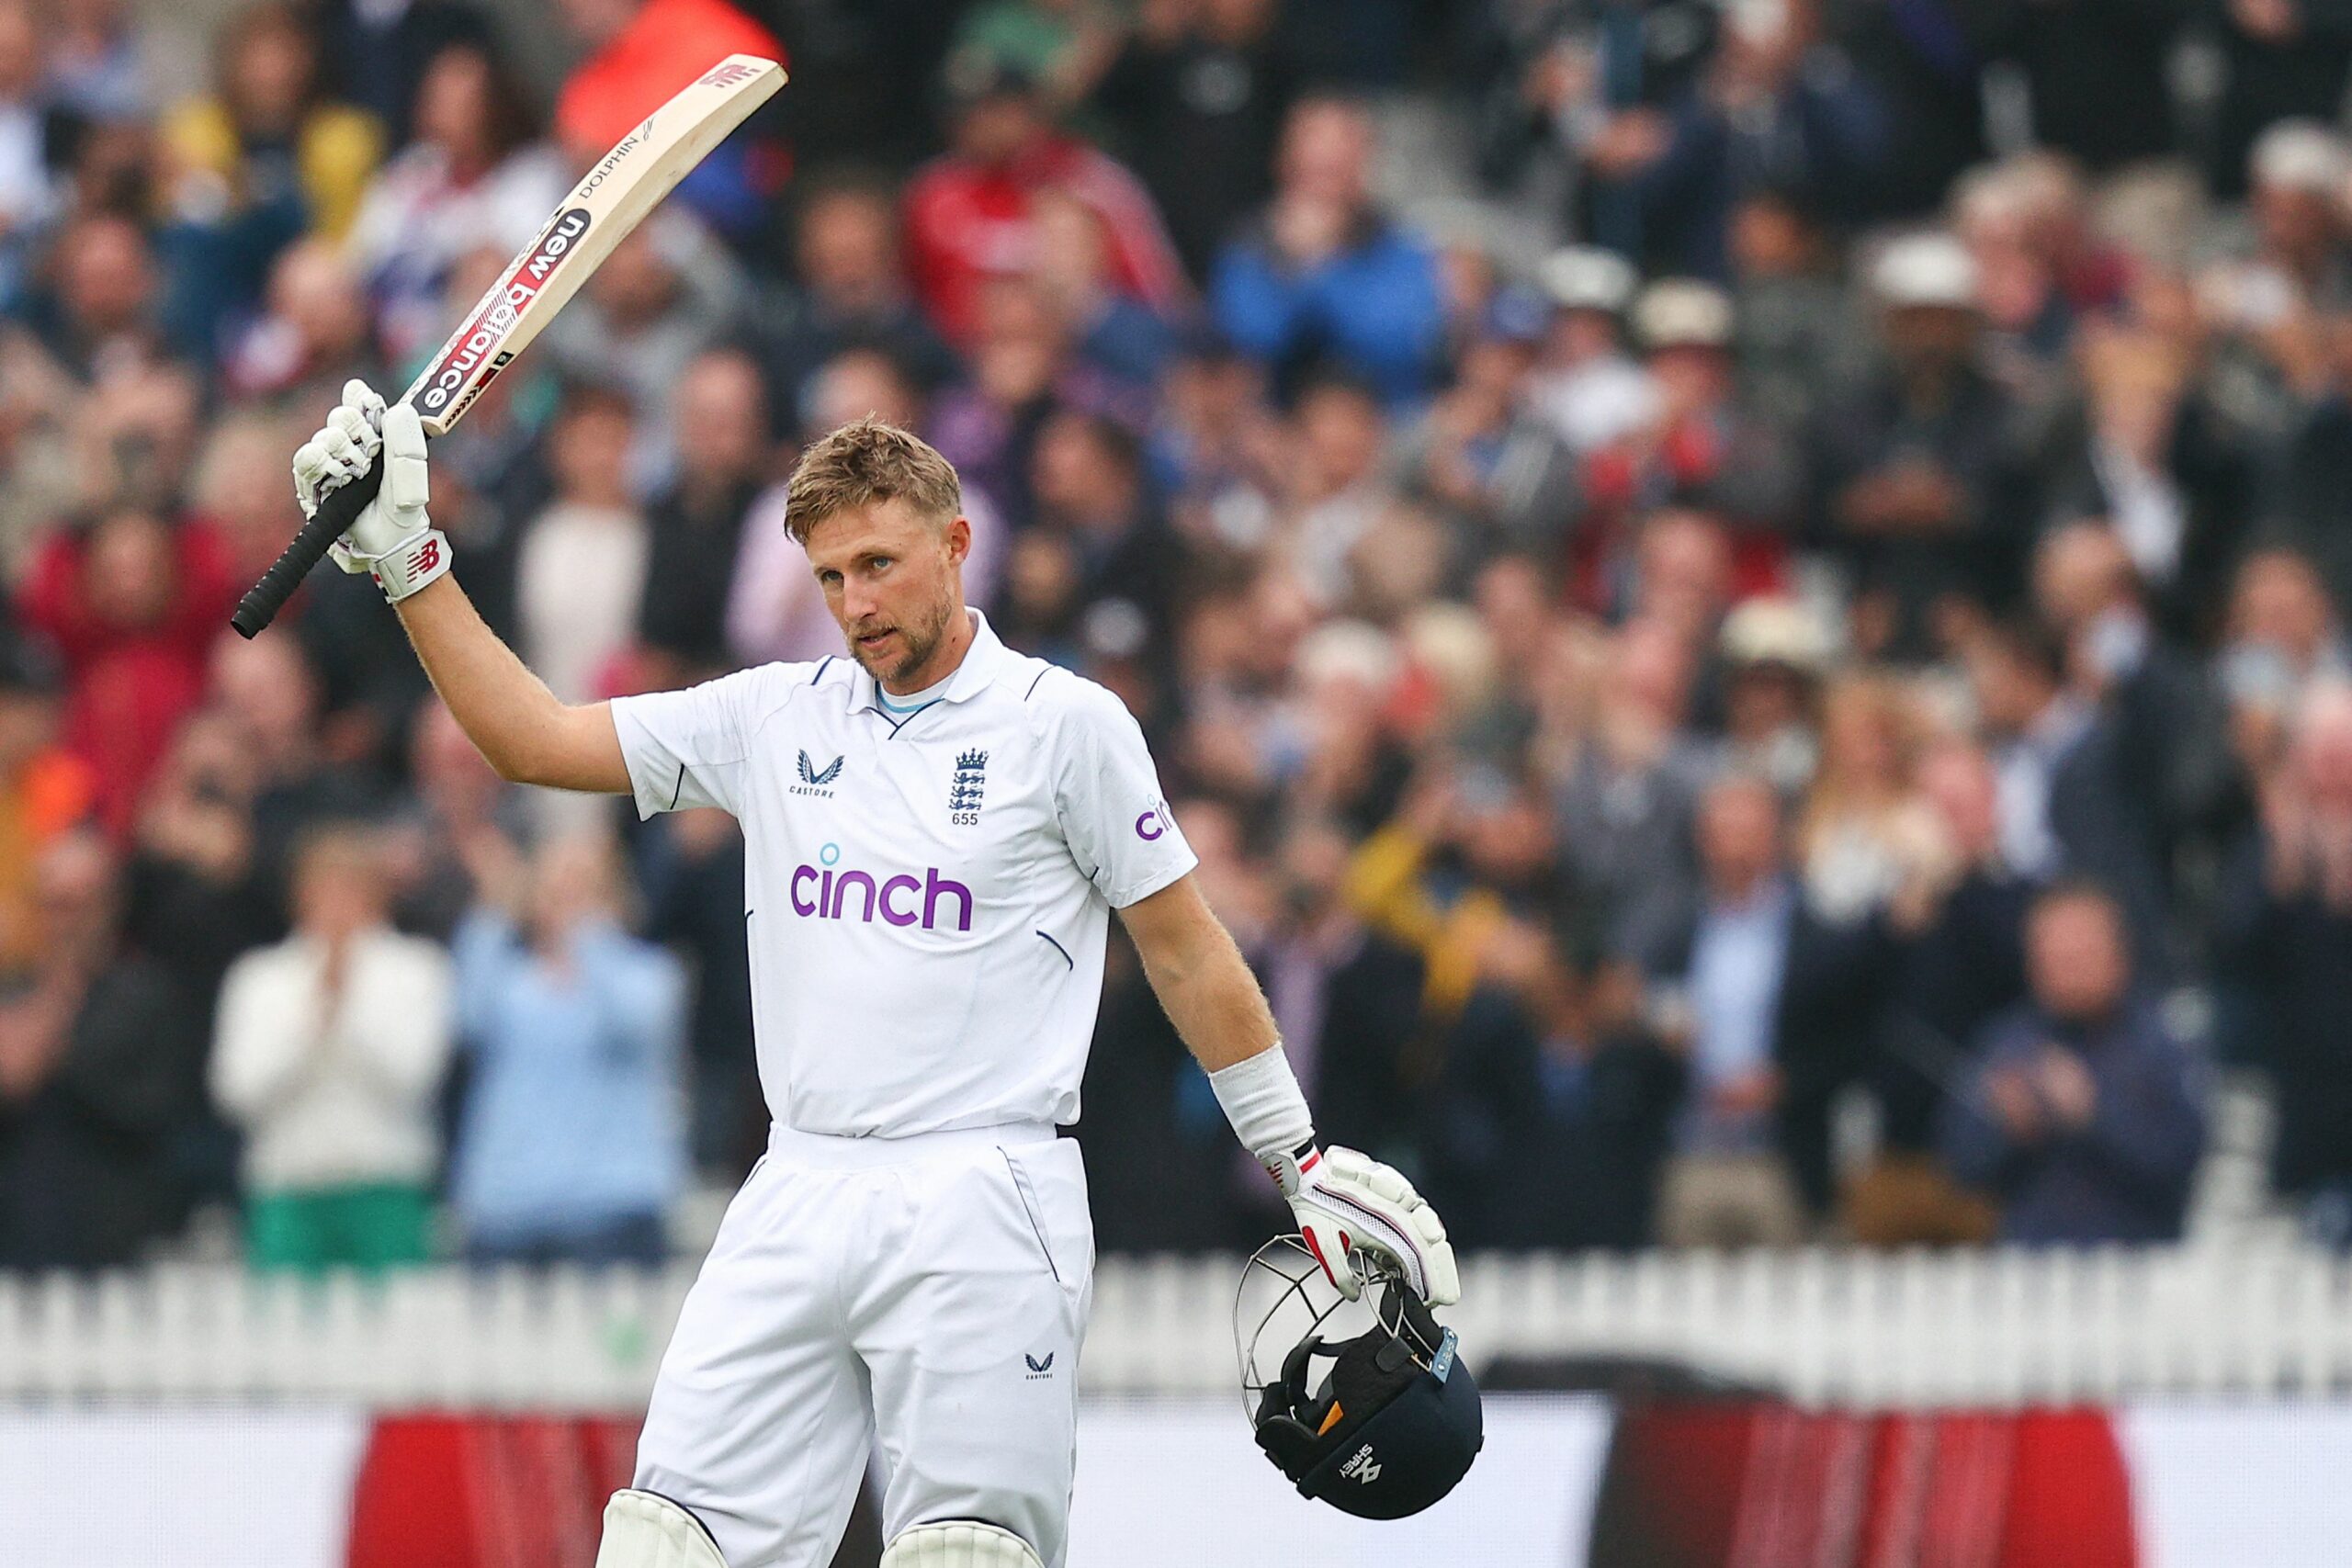 Joe Root has become the 14th player to score 10,000 runs in Test cricket